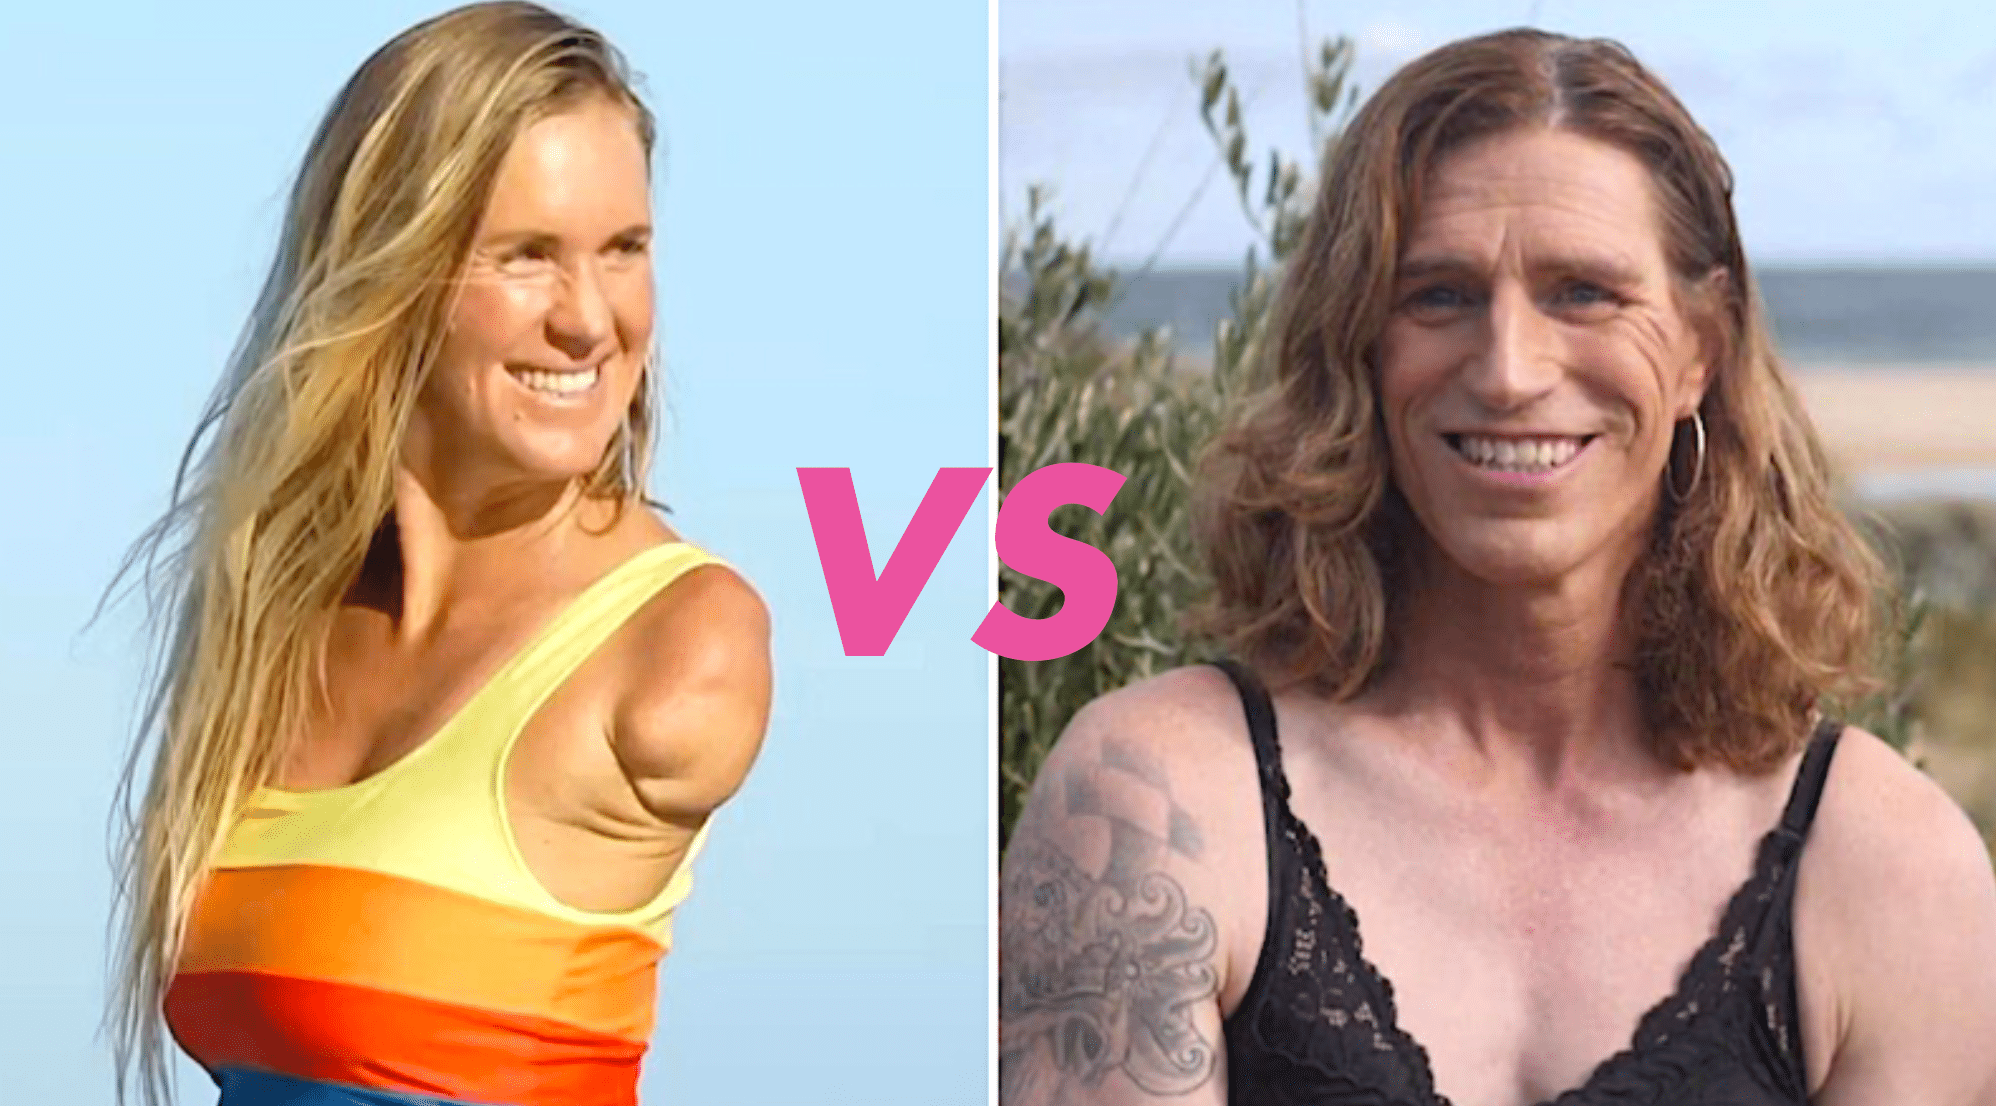 Call to boycott Rip Curl becomes roar as skateboarder Taylor Silverman  joins Riley Gaines in slamming iconic surfing company - BeachGrit